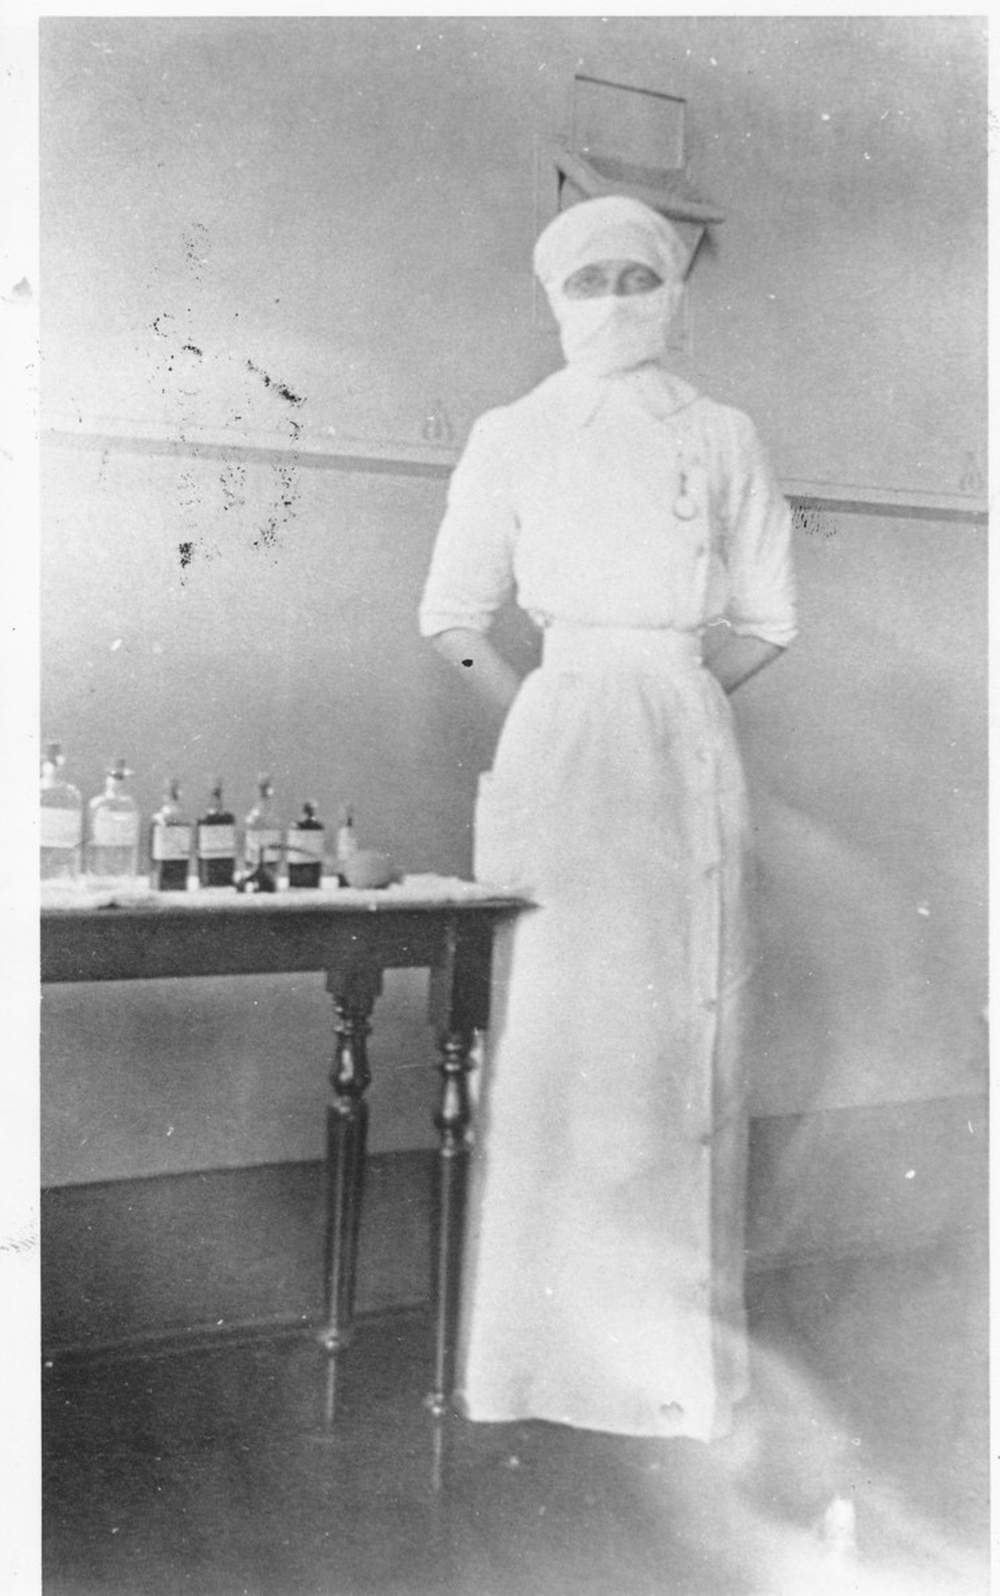 Sister Sarah Waters 1915, during a meningitis epidemic. Alfred Hospital Nurses League collection, reproduced with permission.